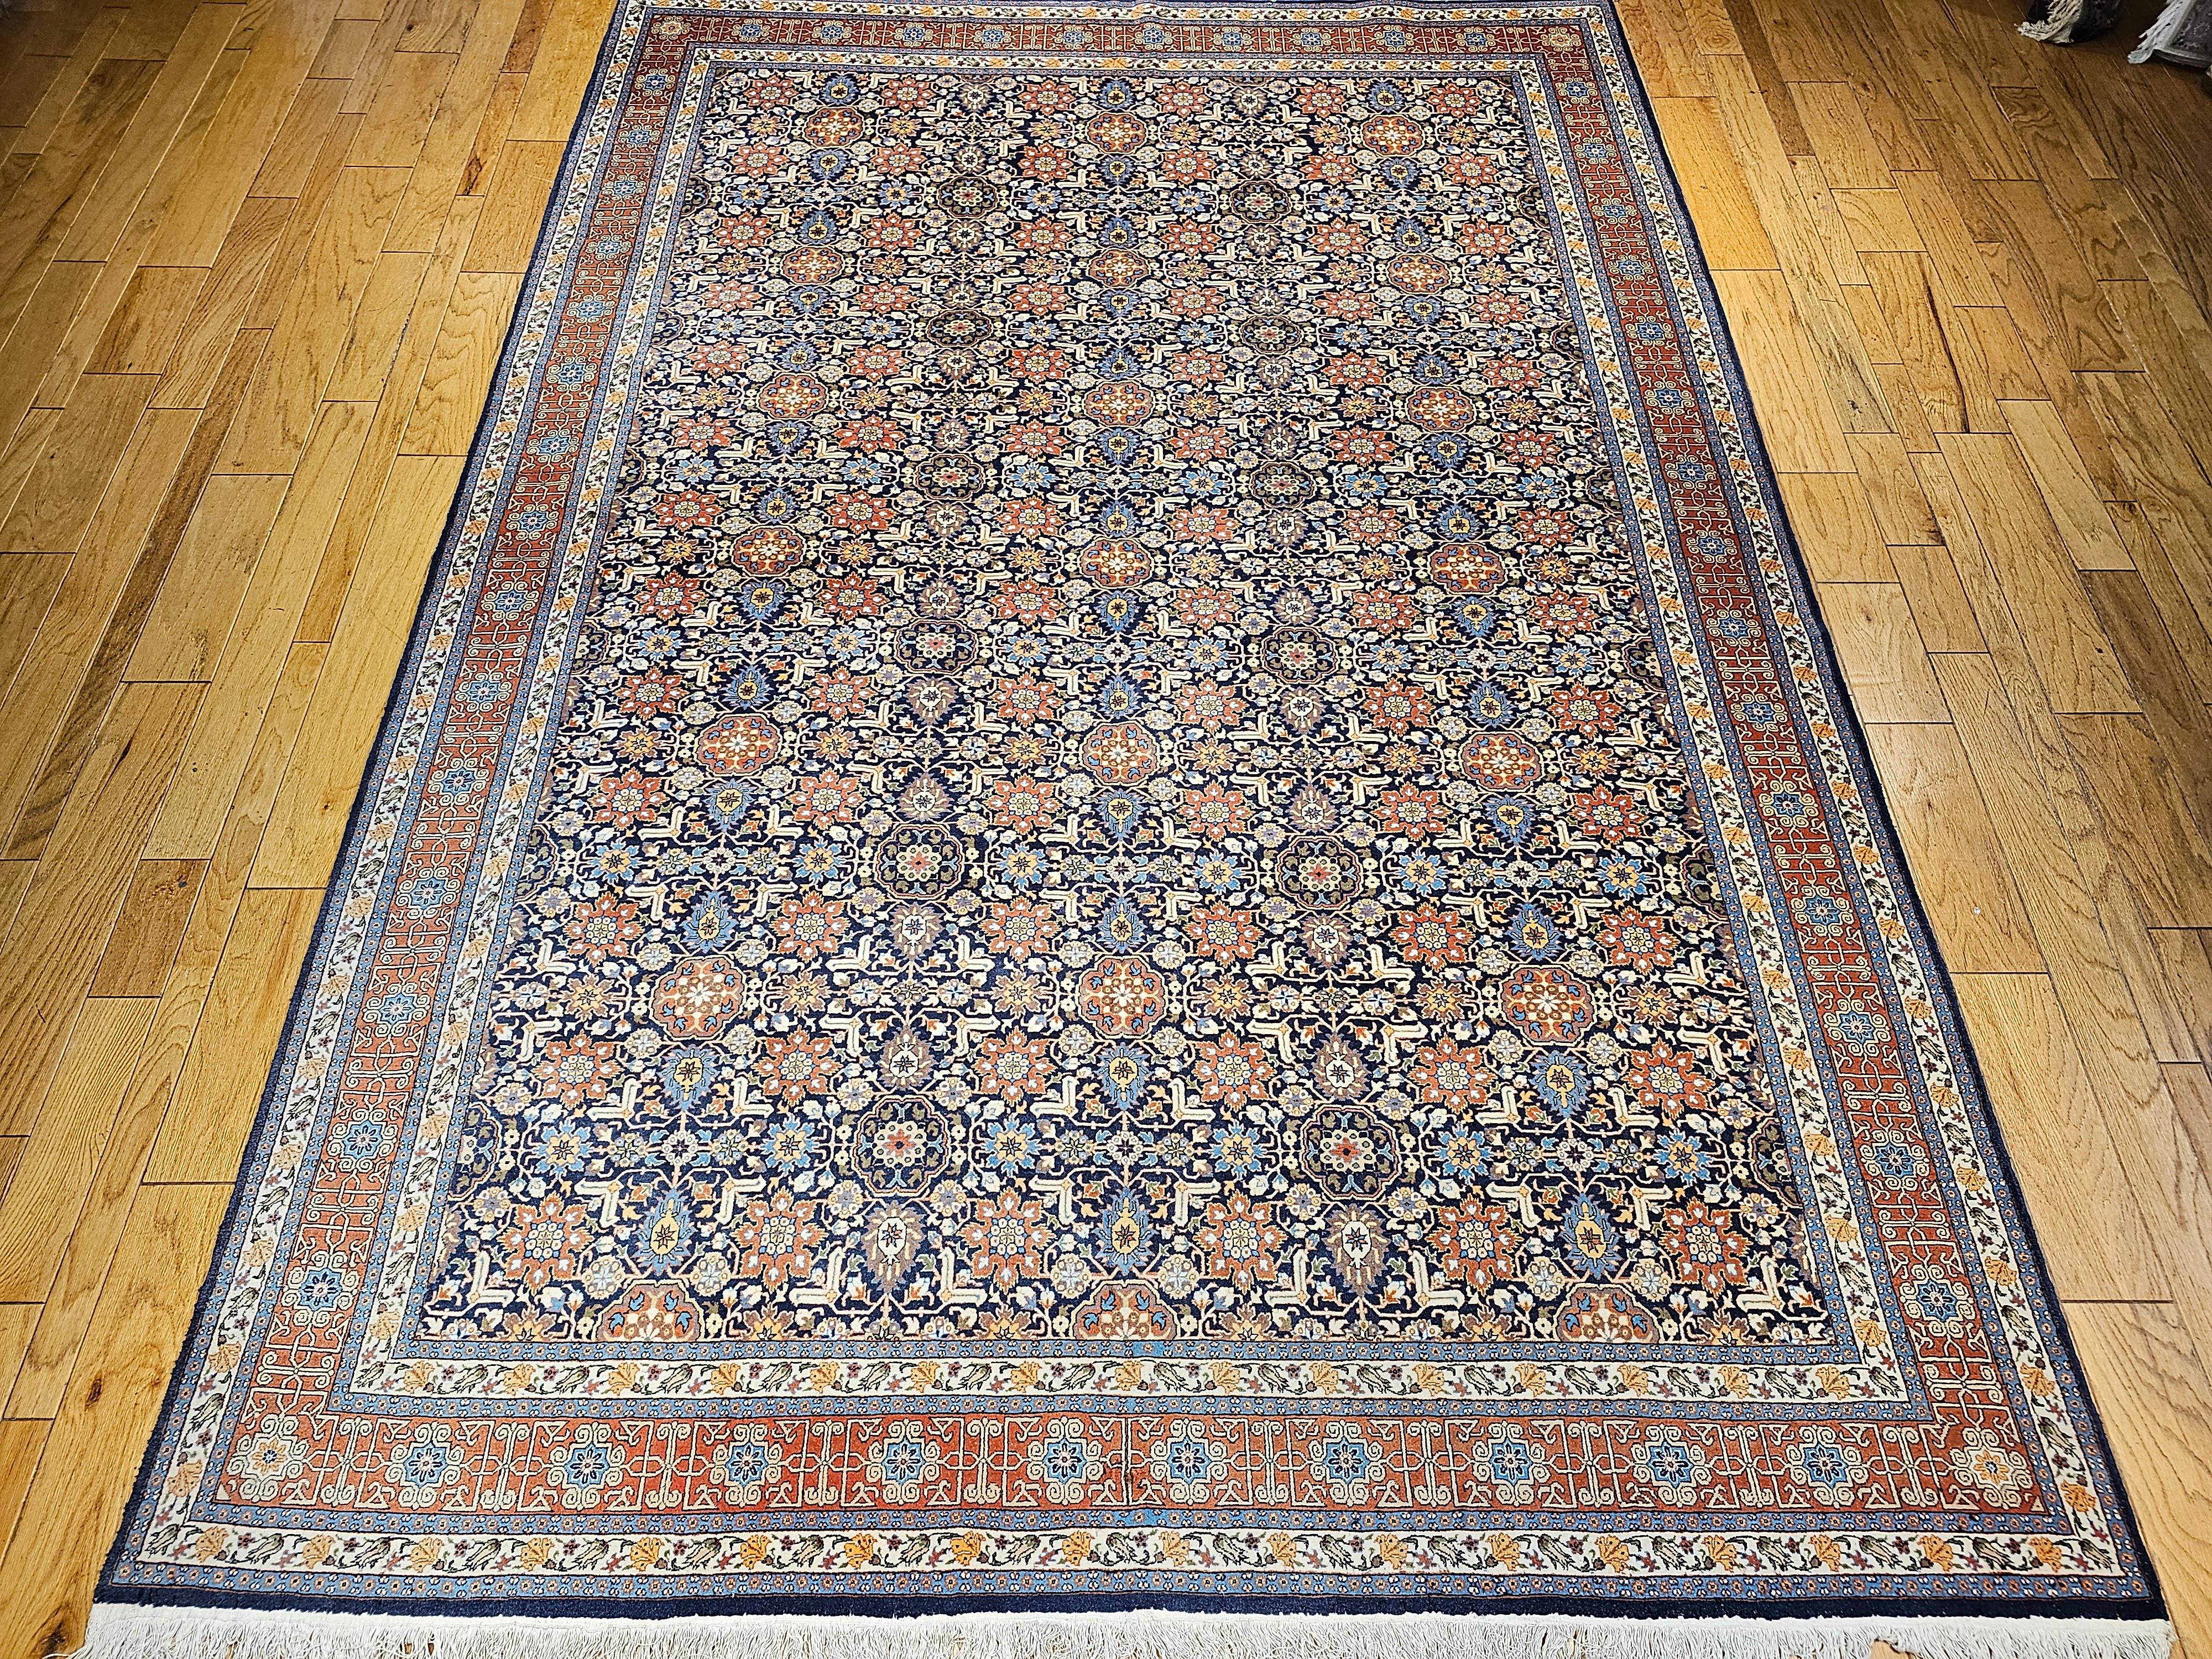 A vintage room size Persian Tabriz in a rare “Afshan” allover pattern set in a navy blue field with a red border circa the 2nd quarter of the 1900s.  The design of this Tabriz rug is following the design of the Caucasian Kuba and Shirvan rugs from